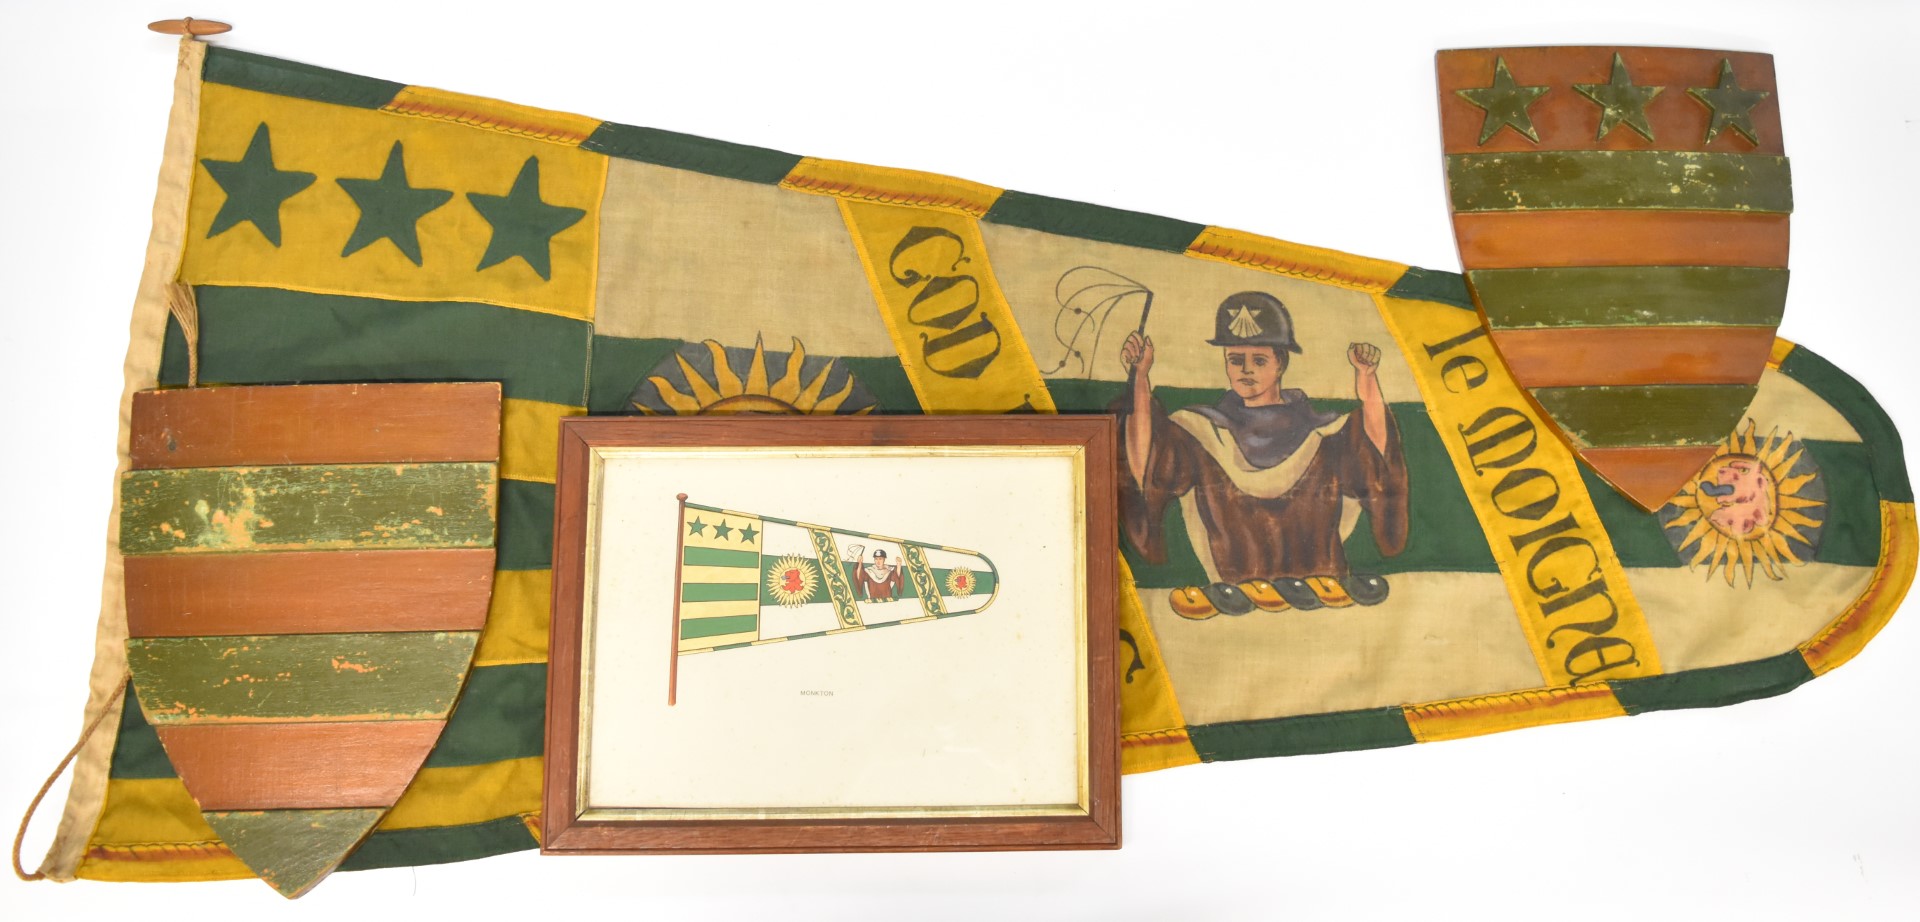 Flag, framed drawing of a similar flag titled Monkton and two wooden coats of arms, length of flag